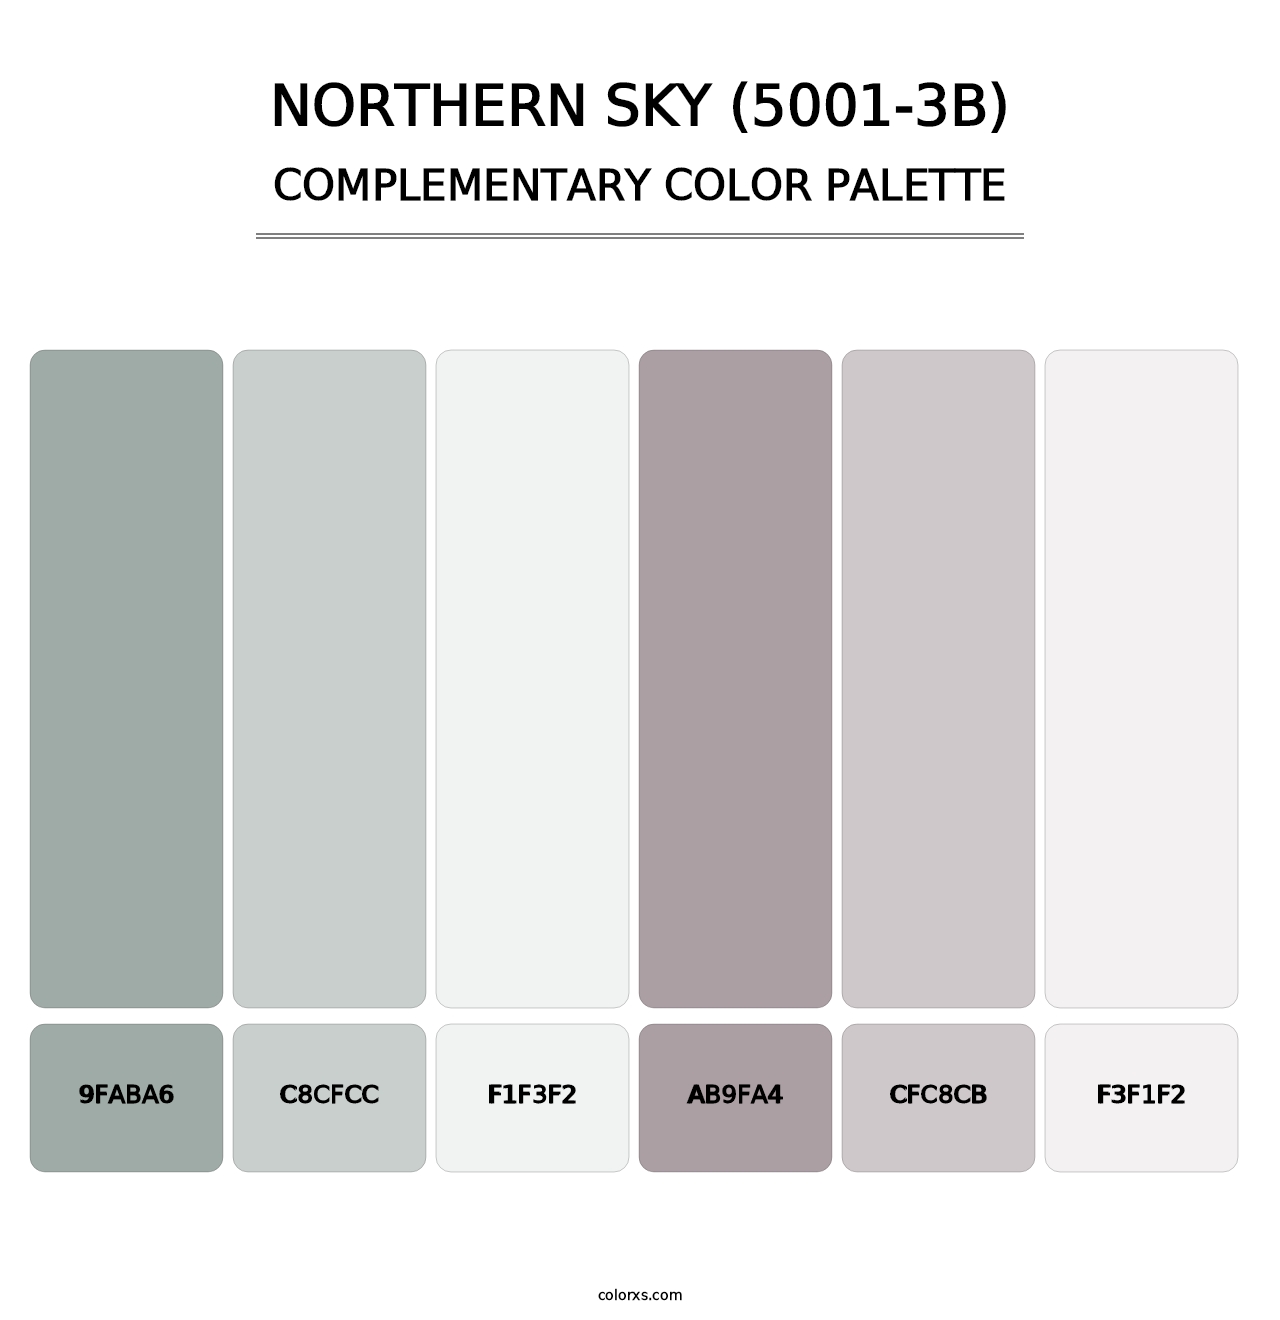 Northern Sky (5001-3B) - Complementary Color Palette